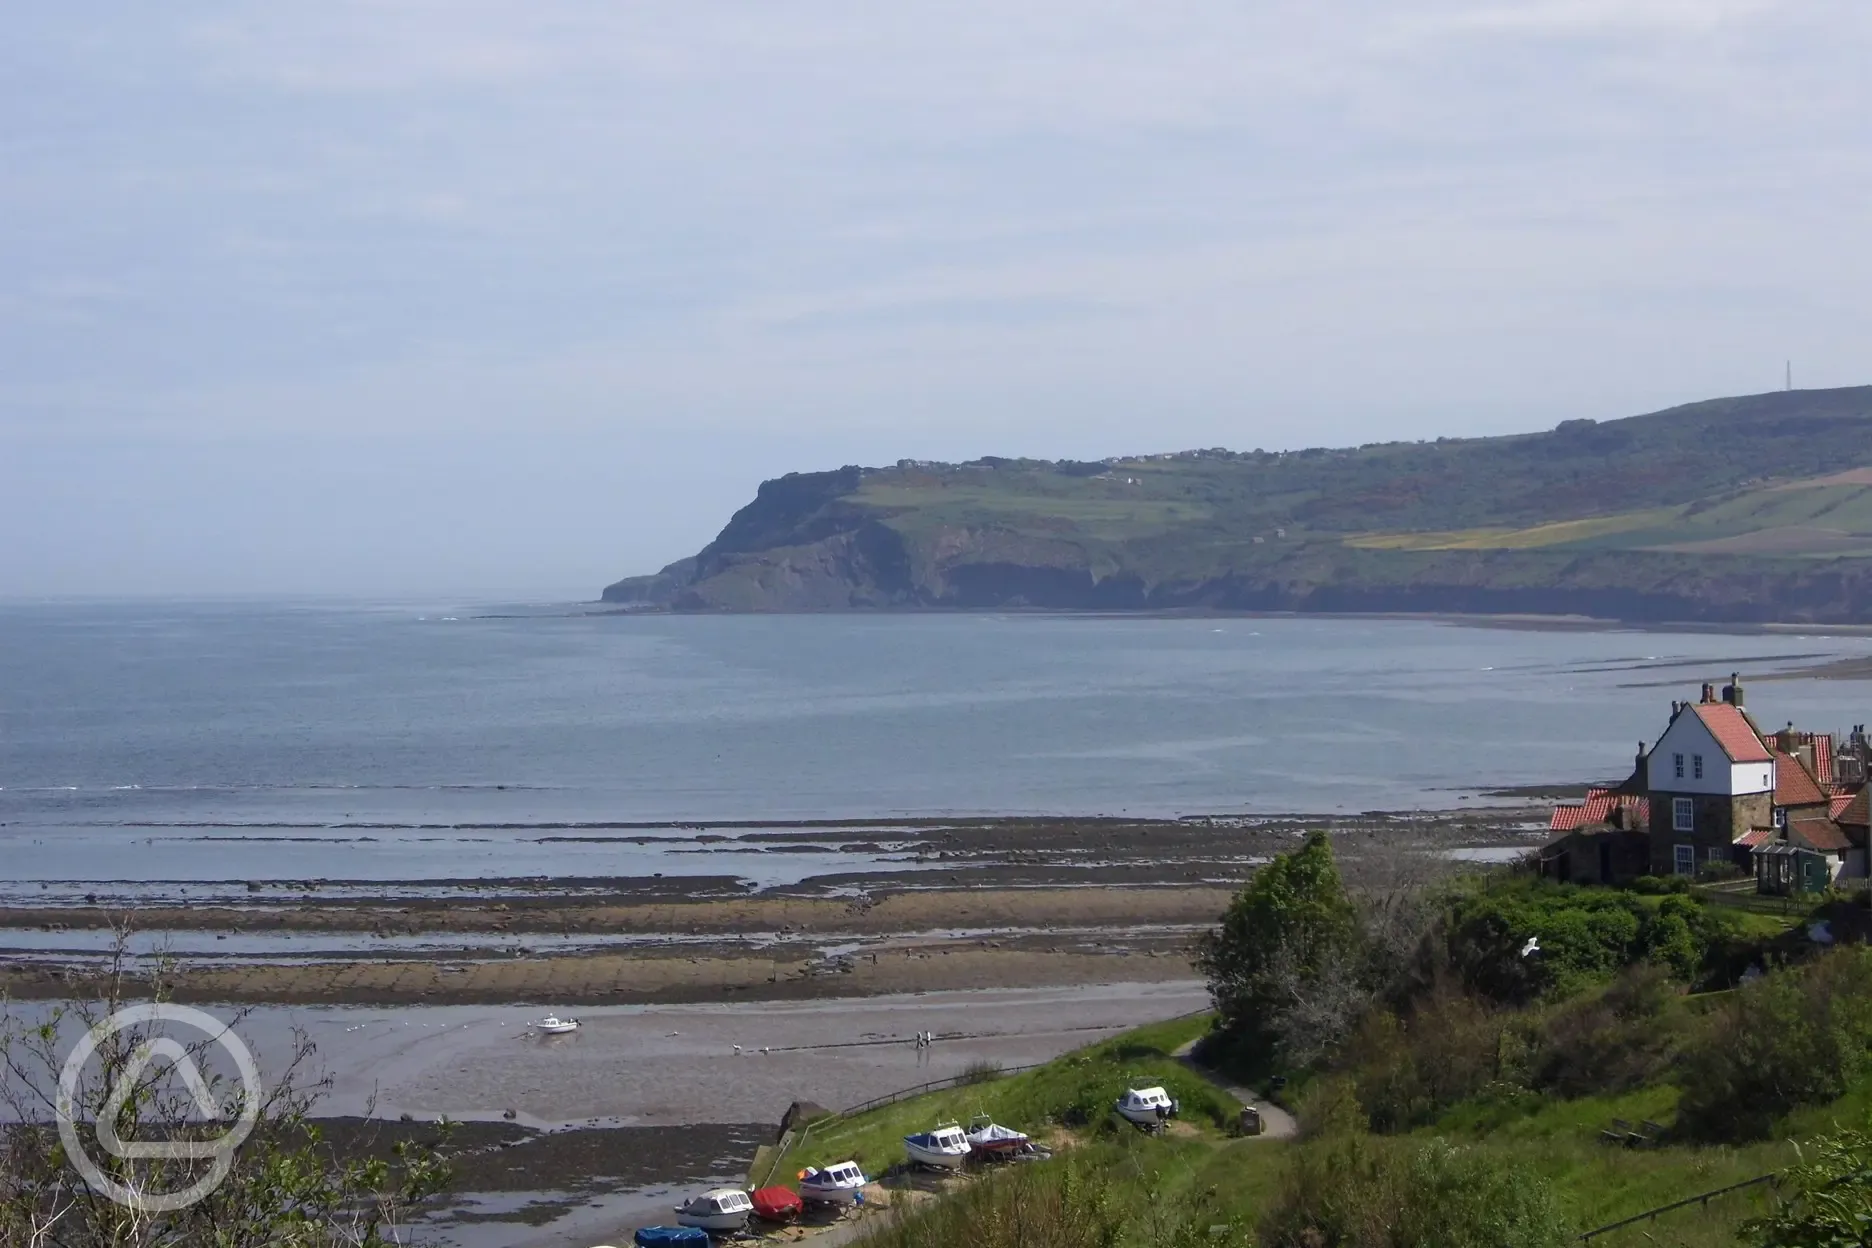 Robin Hoods Bay - just 5 miles from us